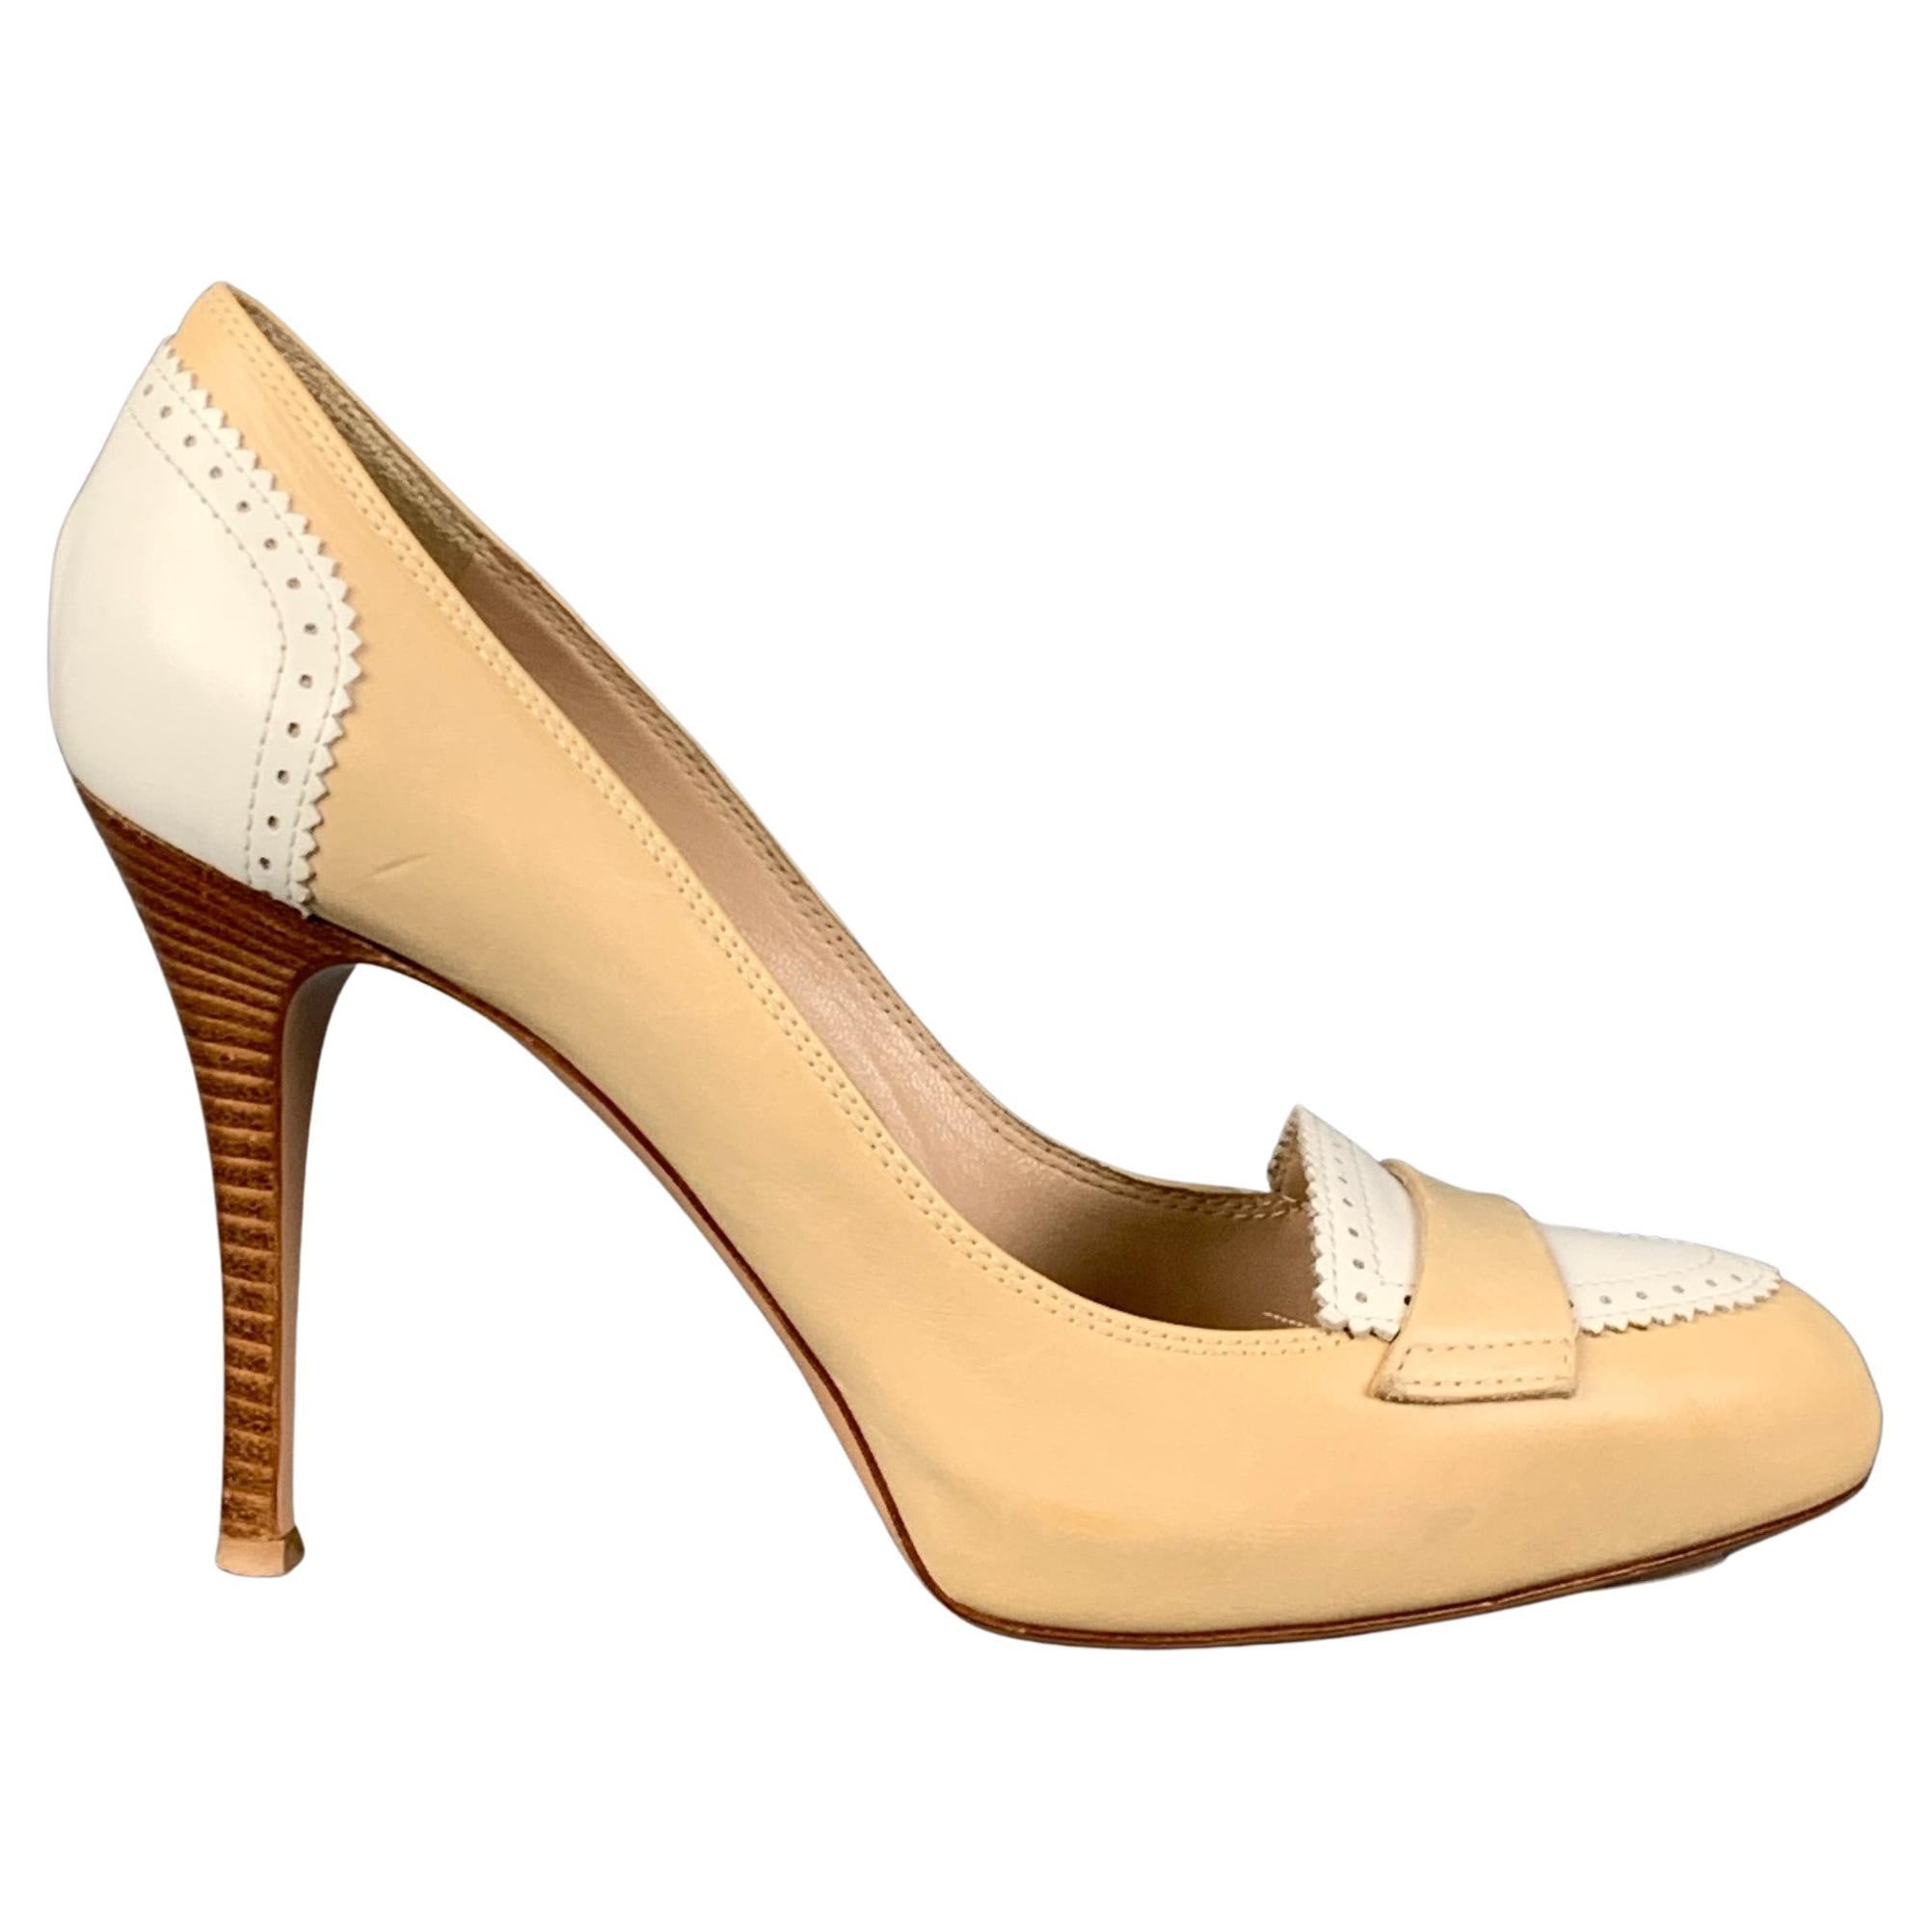 GIANVITO ROSSI Size 7 Beige Cream Leather Perforated Pumps